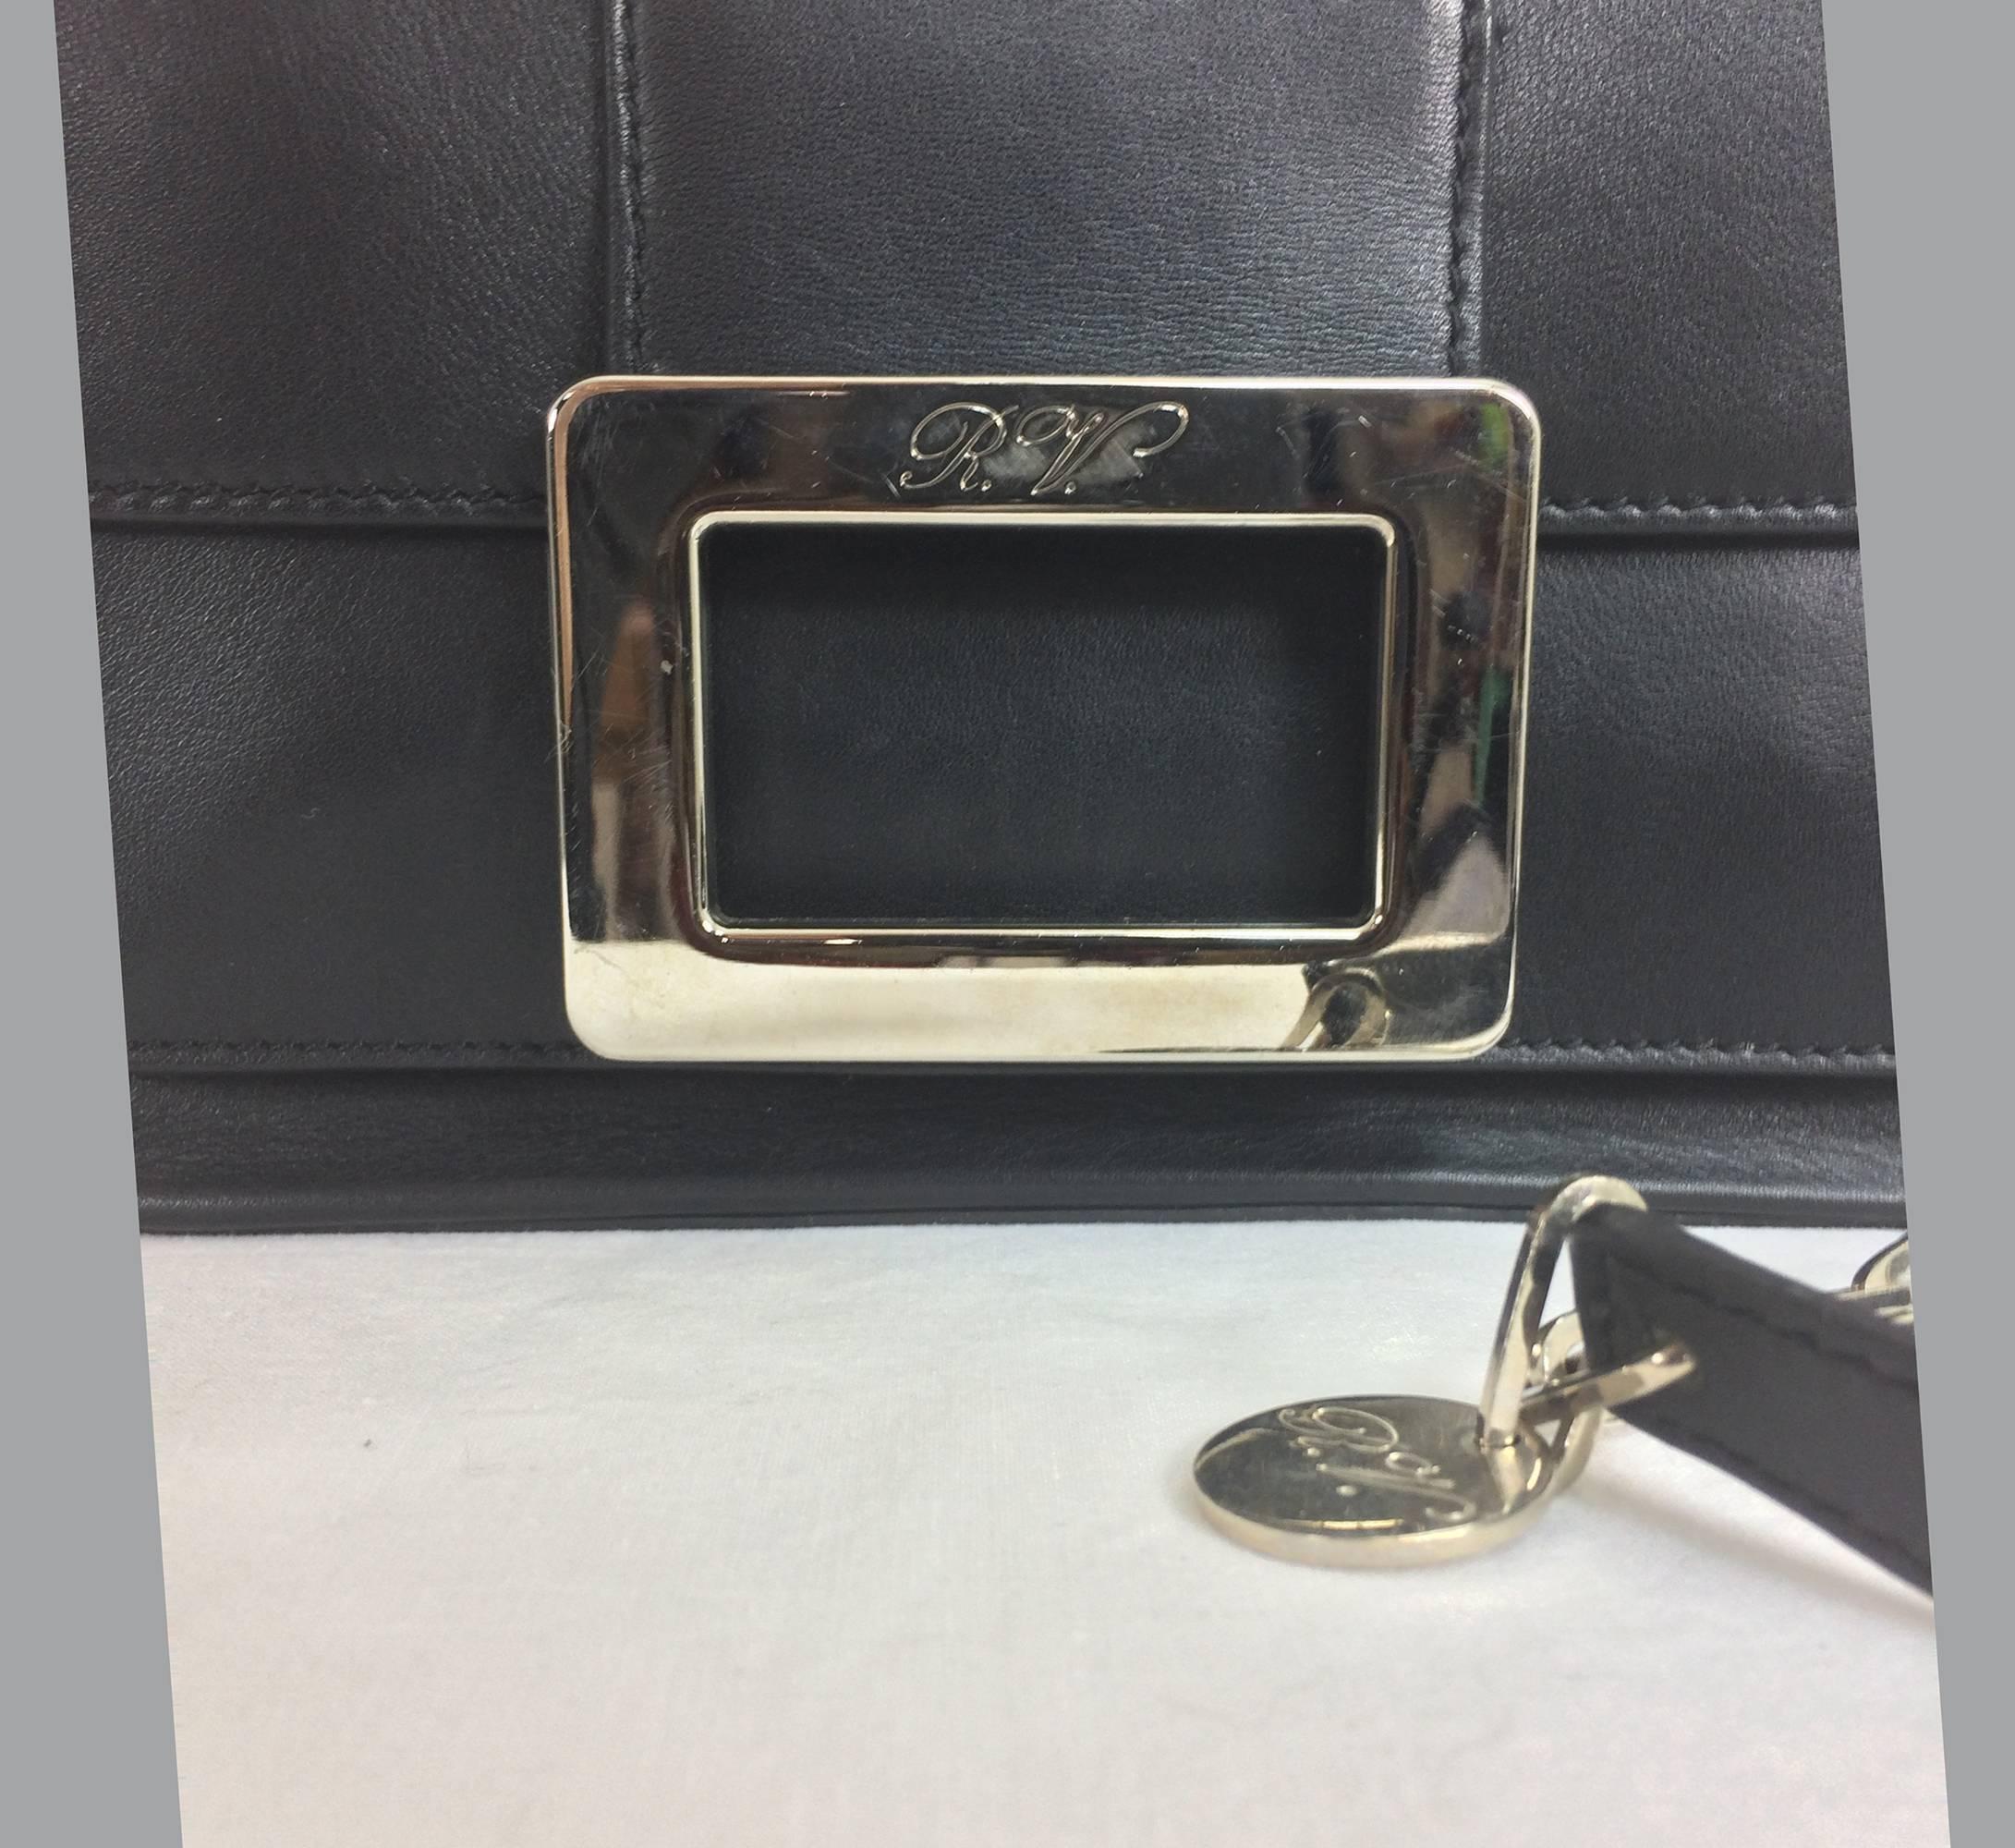 Roger Vivier black flap front leather shoulder bag with silver hardware...Beautiful black leather shoulder bag with a flap close front there is an open compartment under the flap, silver buckle with engraved RW...Silver chain (adjustable) and